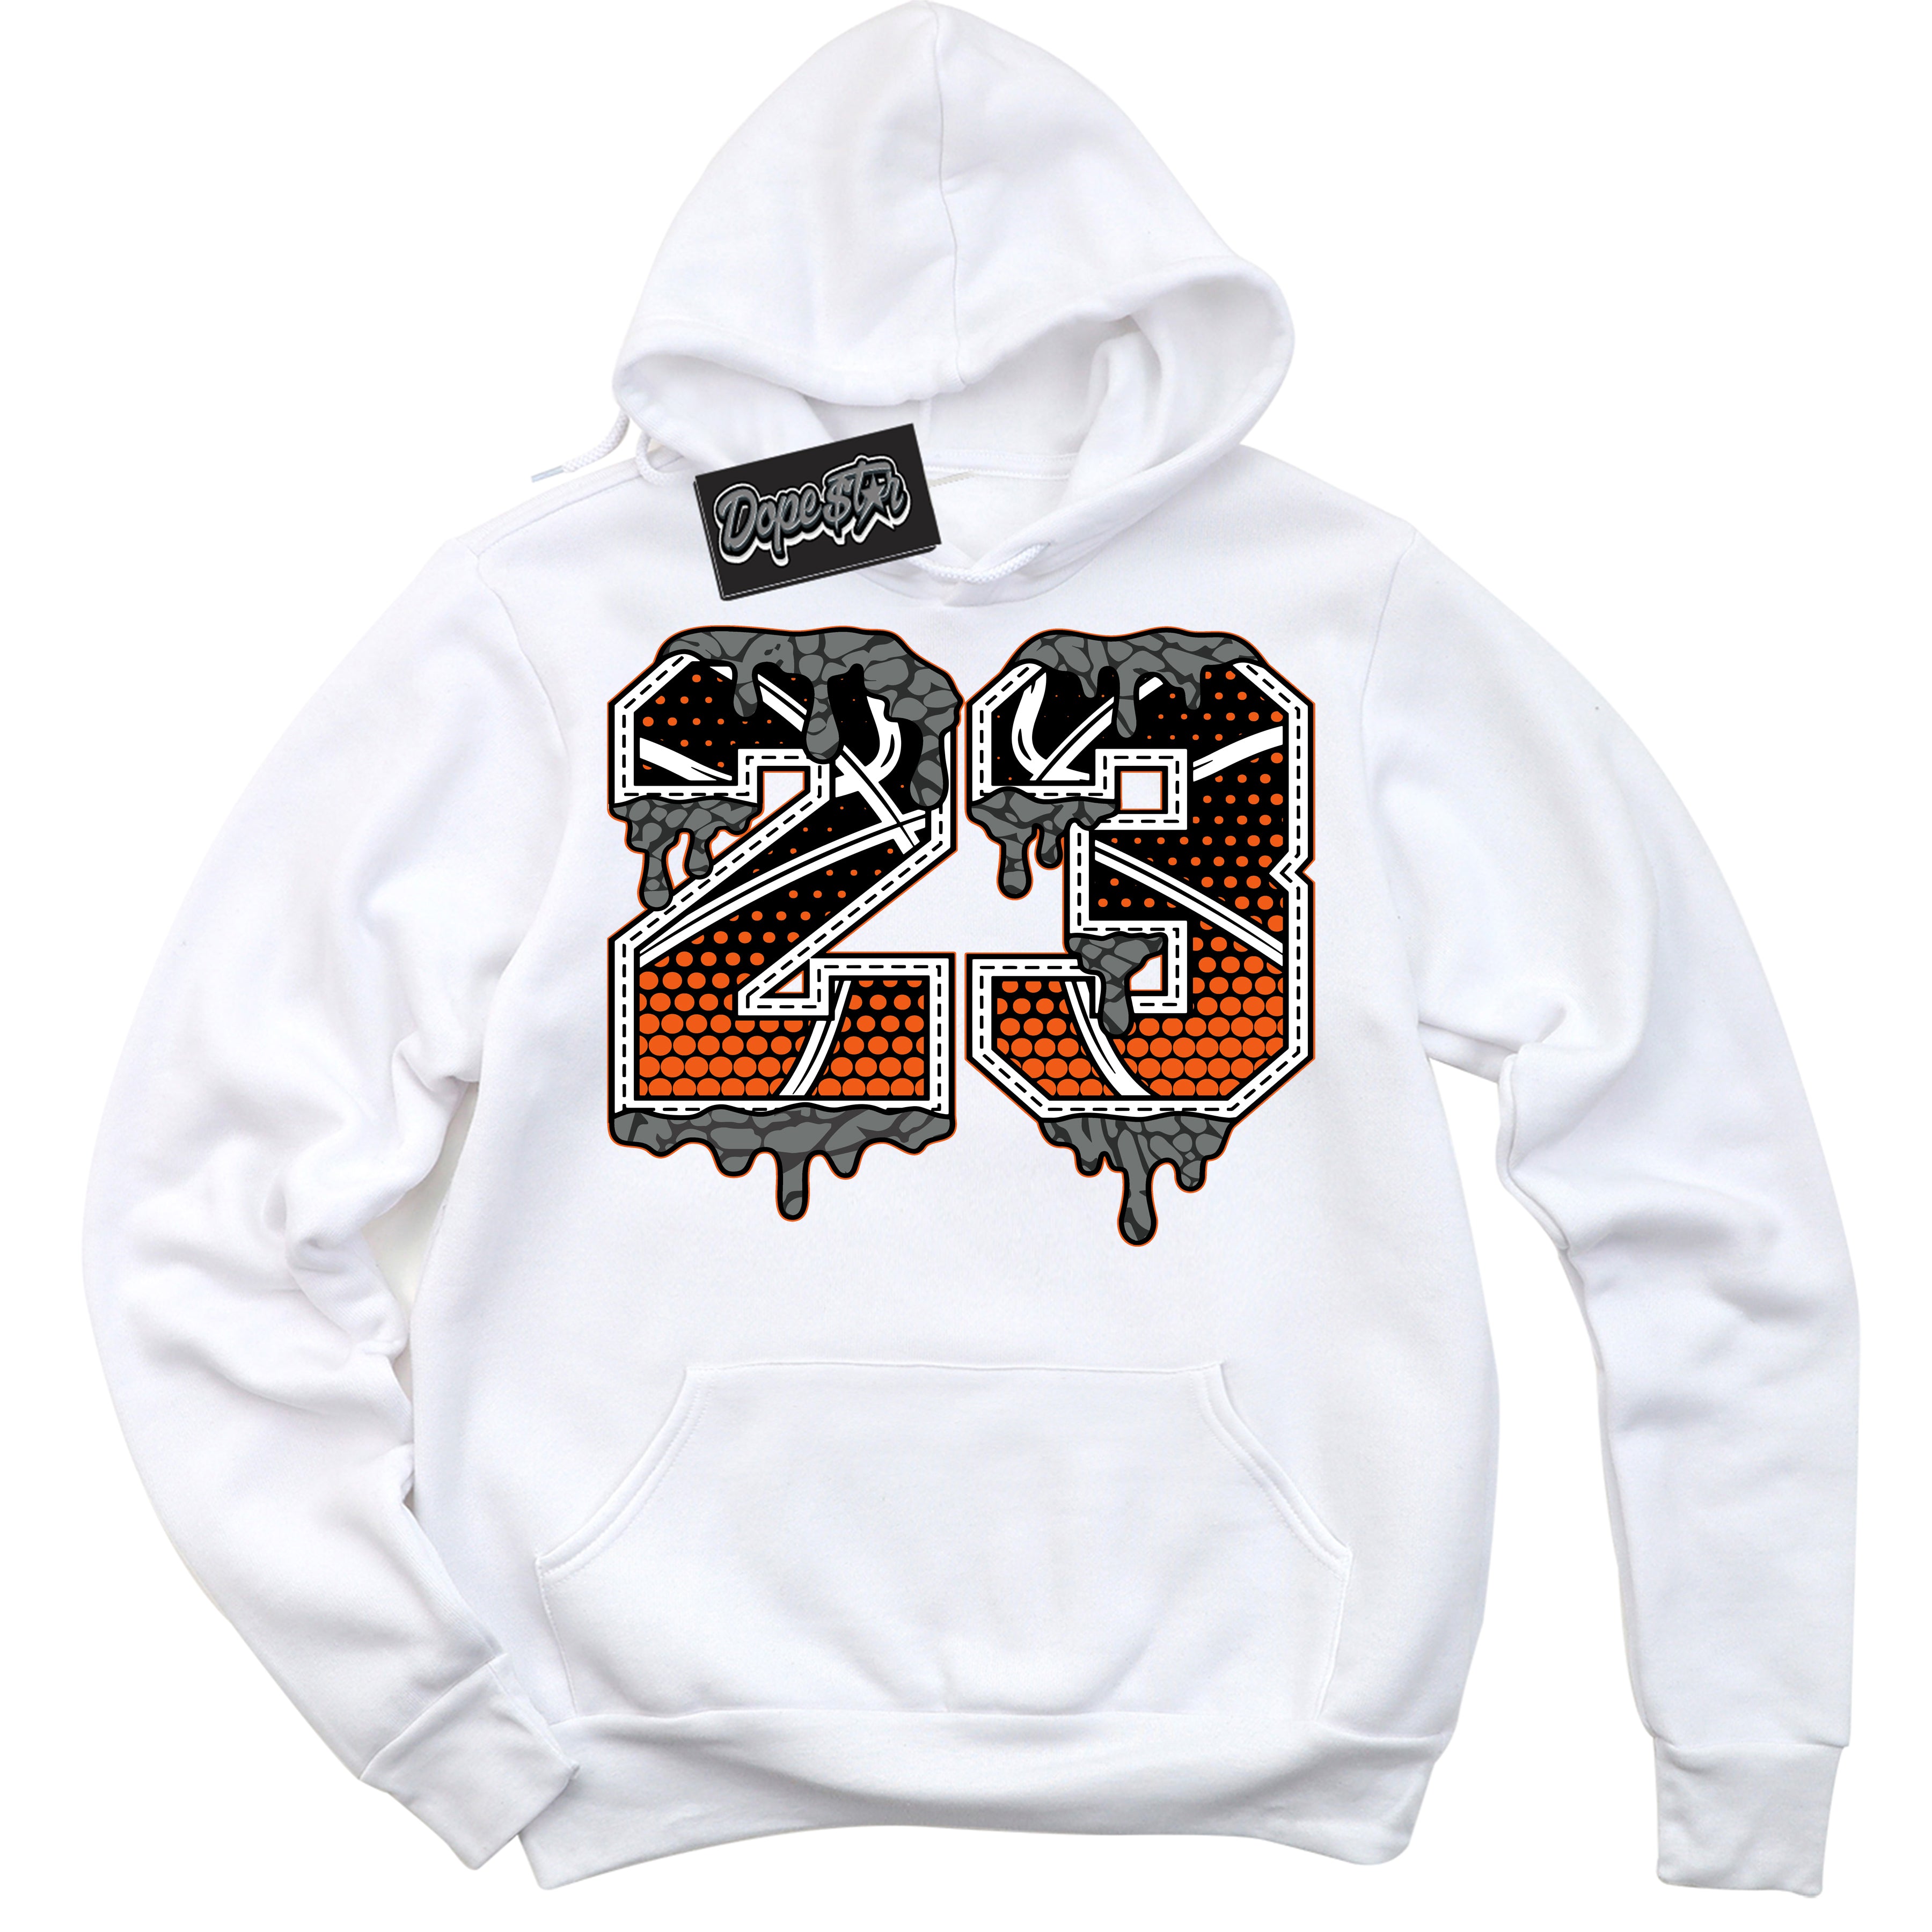 Cool White Graphic DopeStar Hoodie with “ 23 Ball “ print, that perfectly matches Fear Pack 3s sneakers